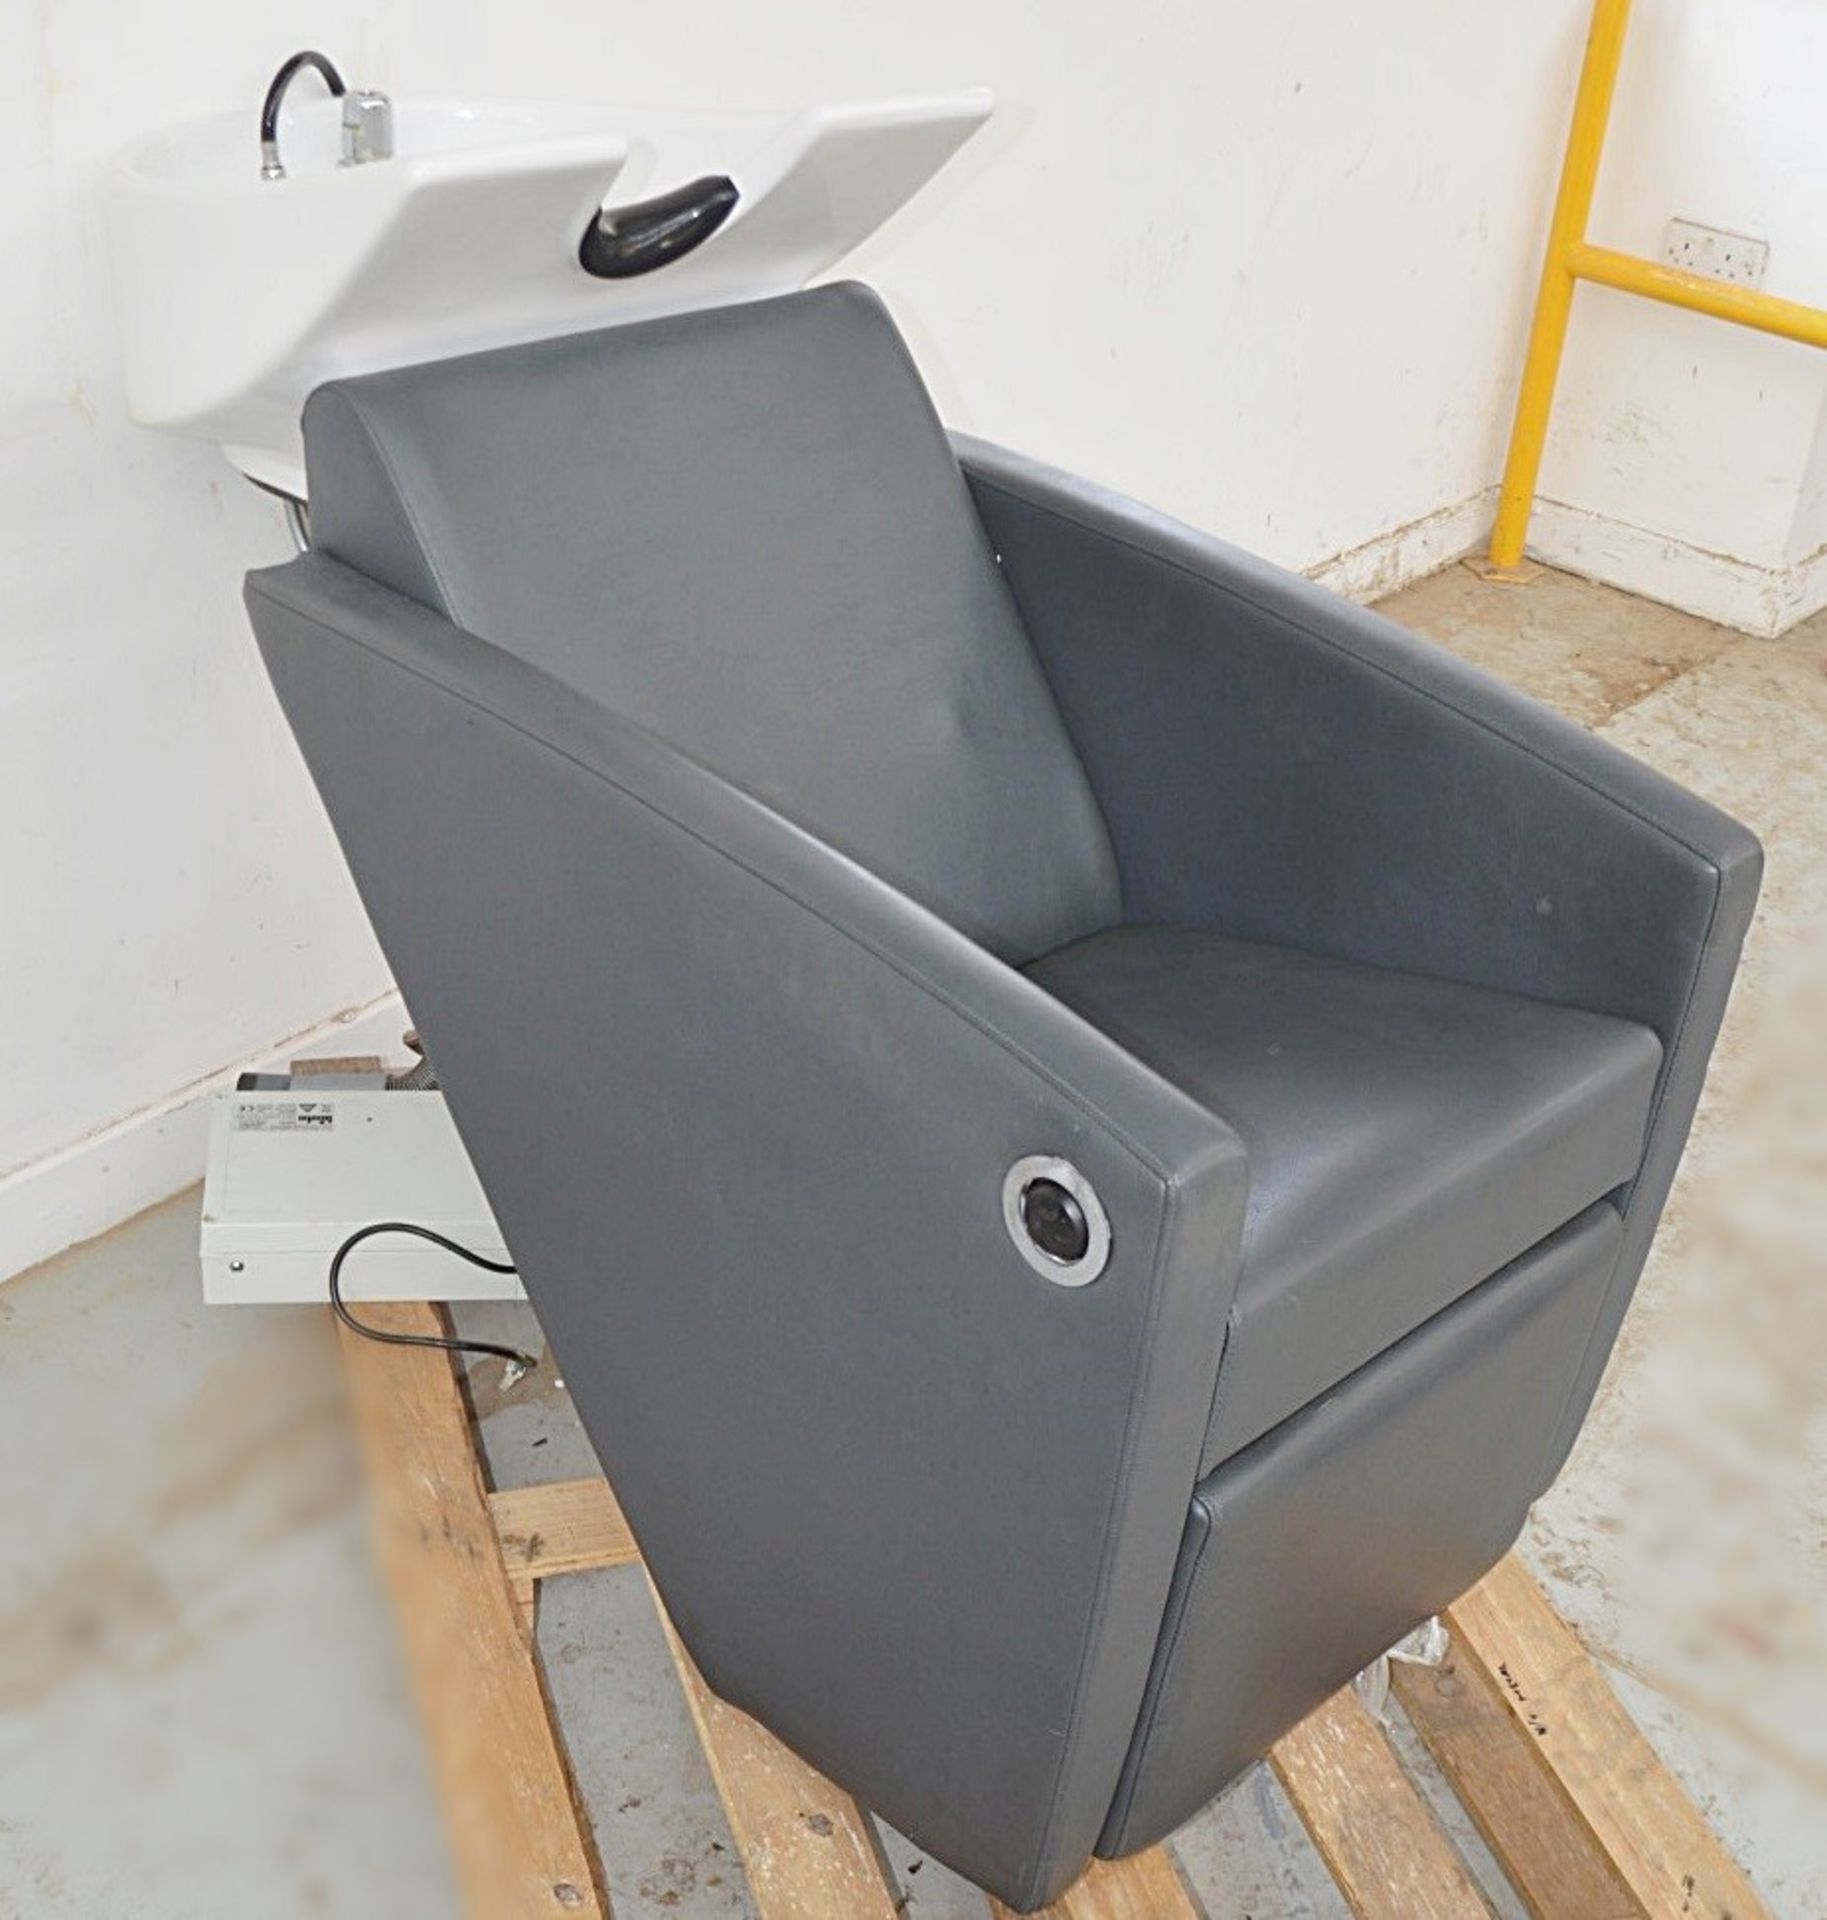 1 x Professional Reclining Hair Washing Chair With Basin Shower And Foot Rest - Image 18 of 19